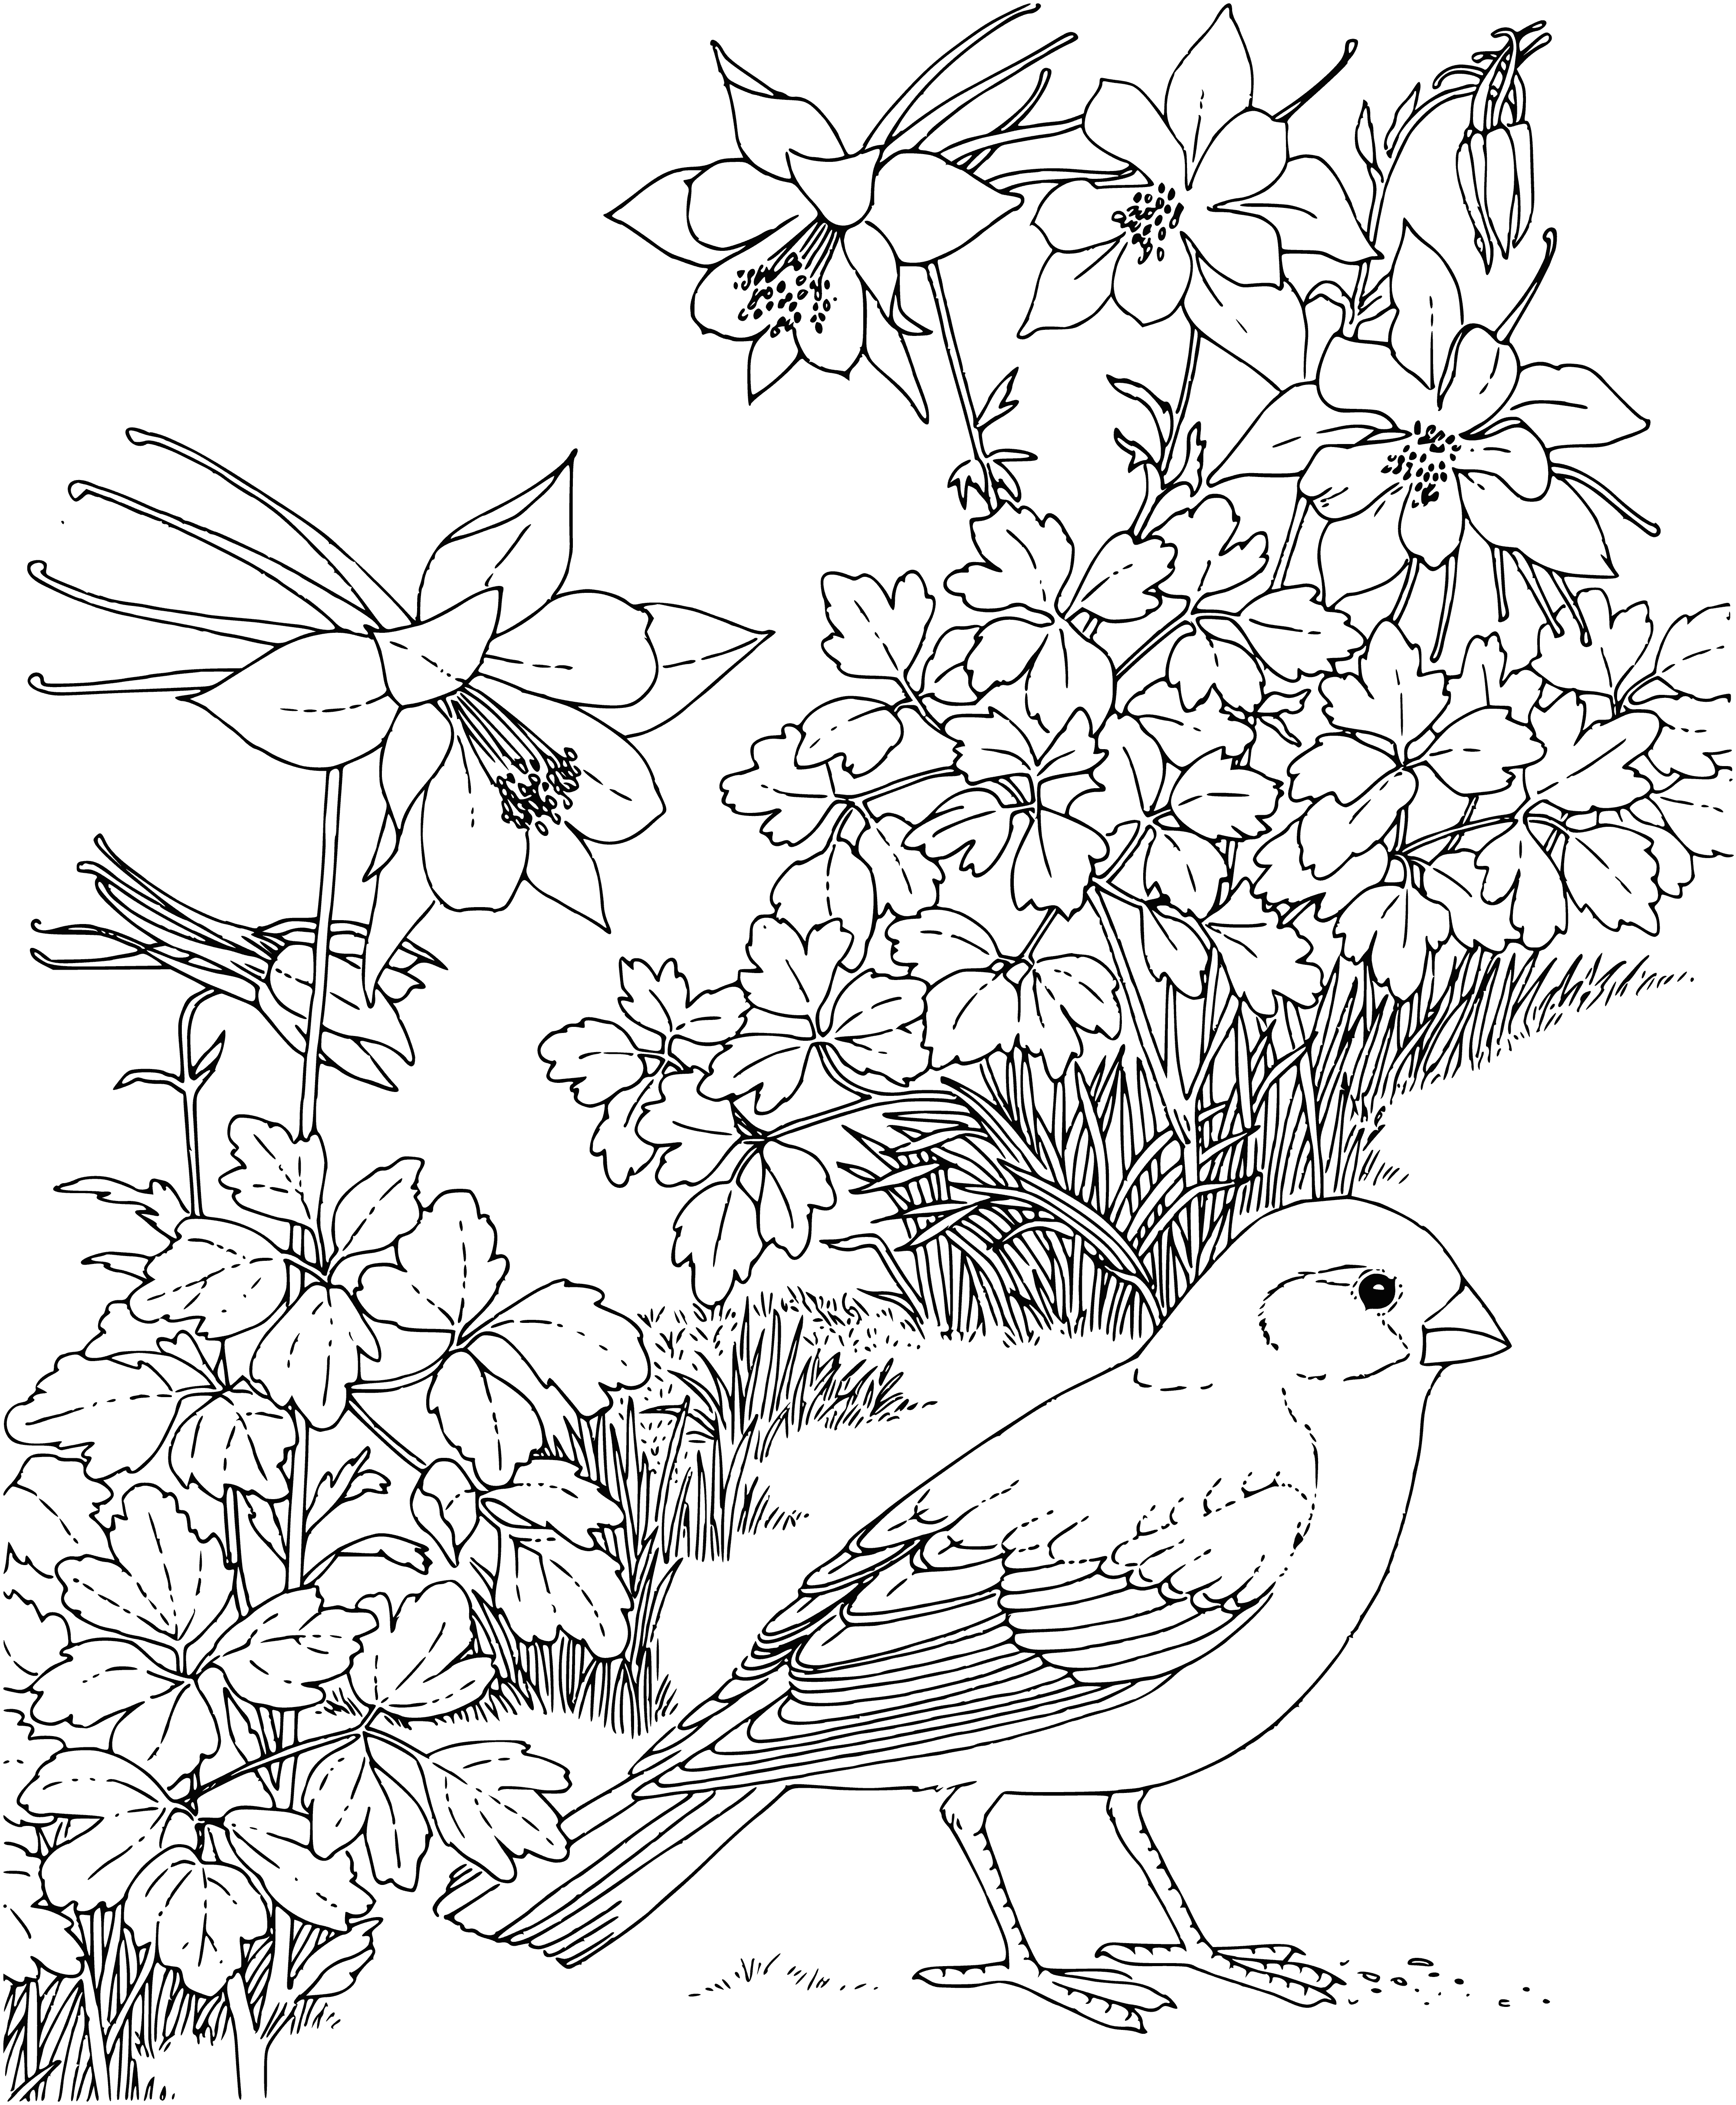 coloring page: White bird in center of coloring page w/ oatmeal & fork, wings out, eyes closed.